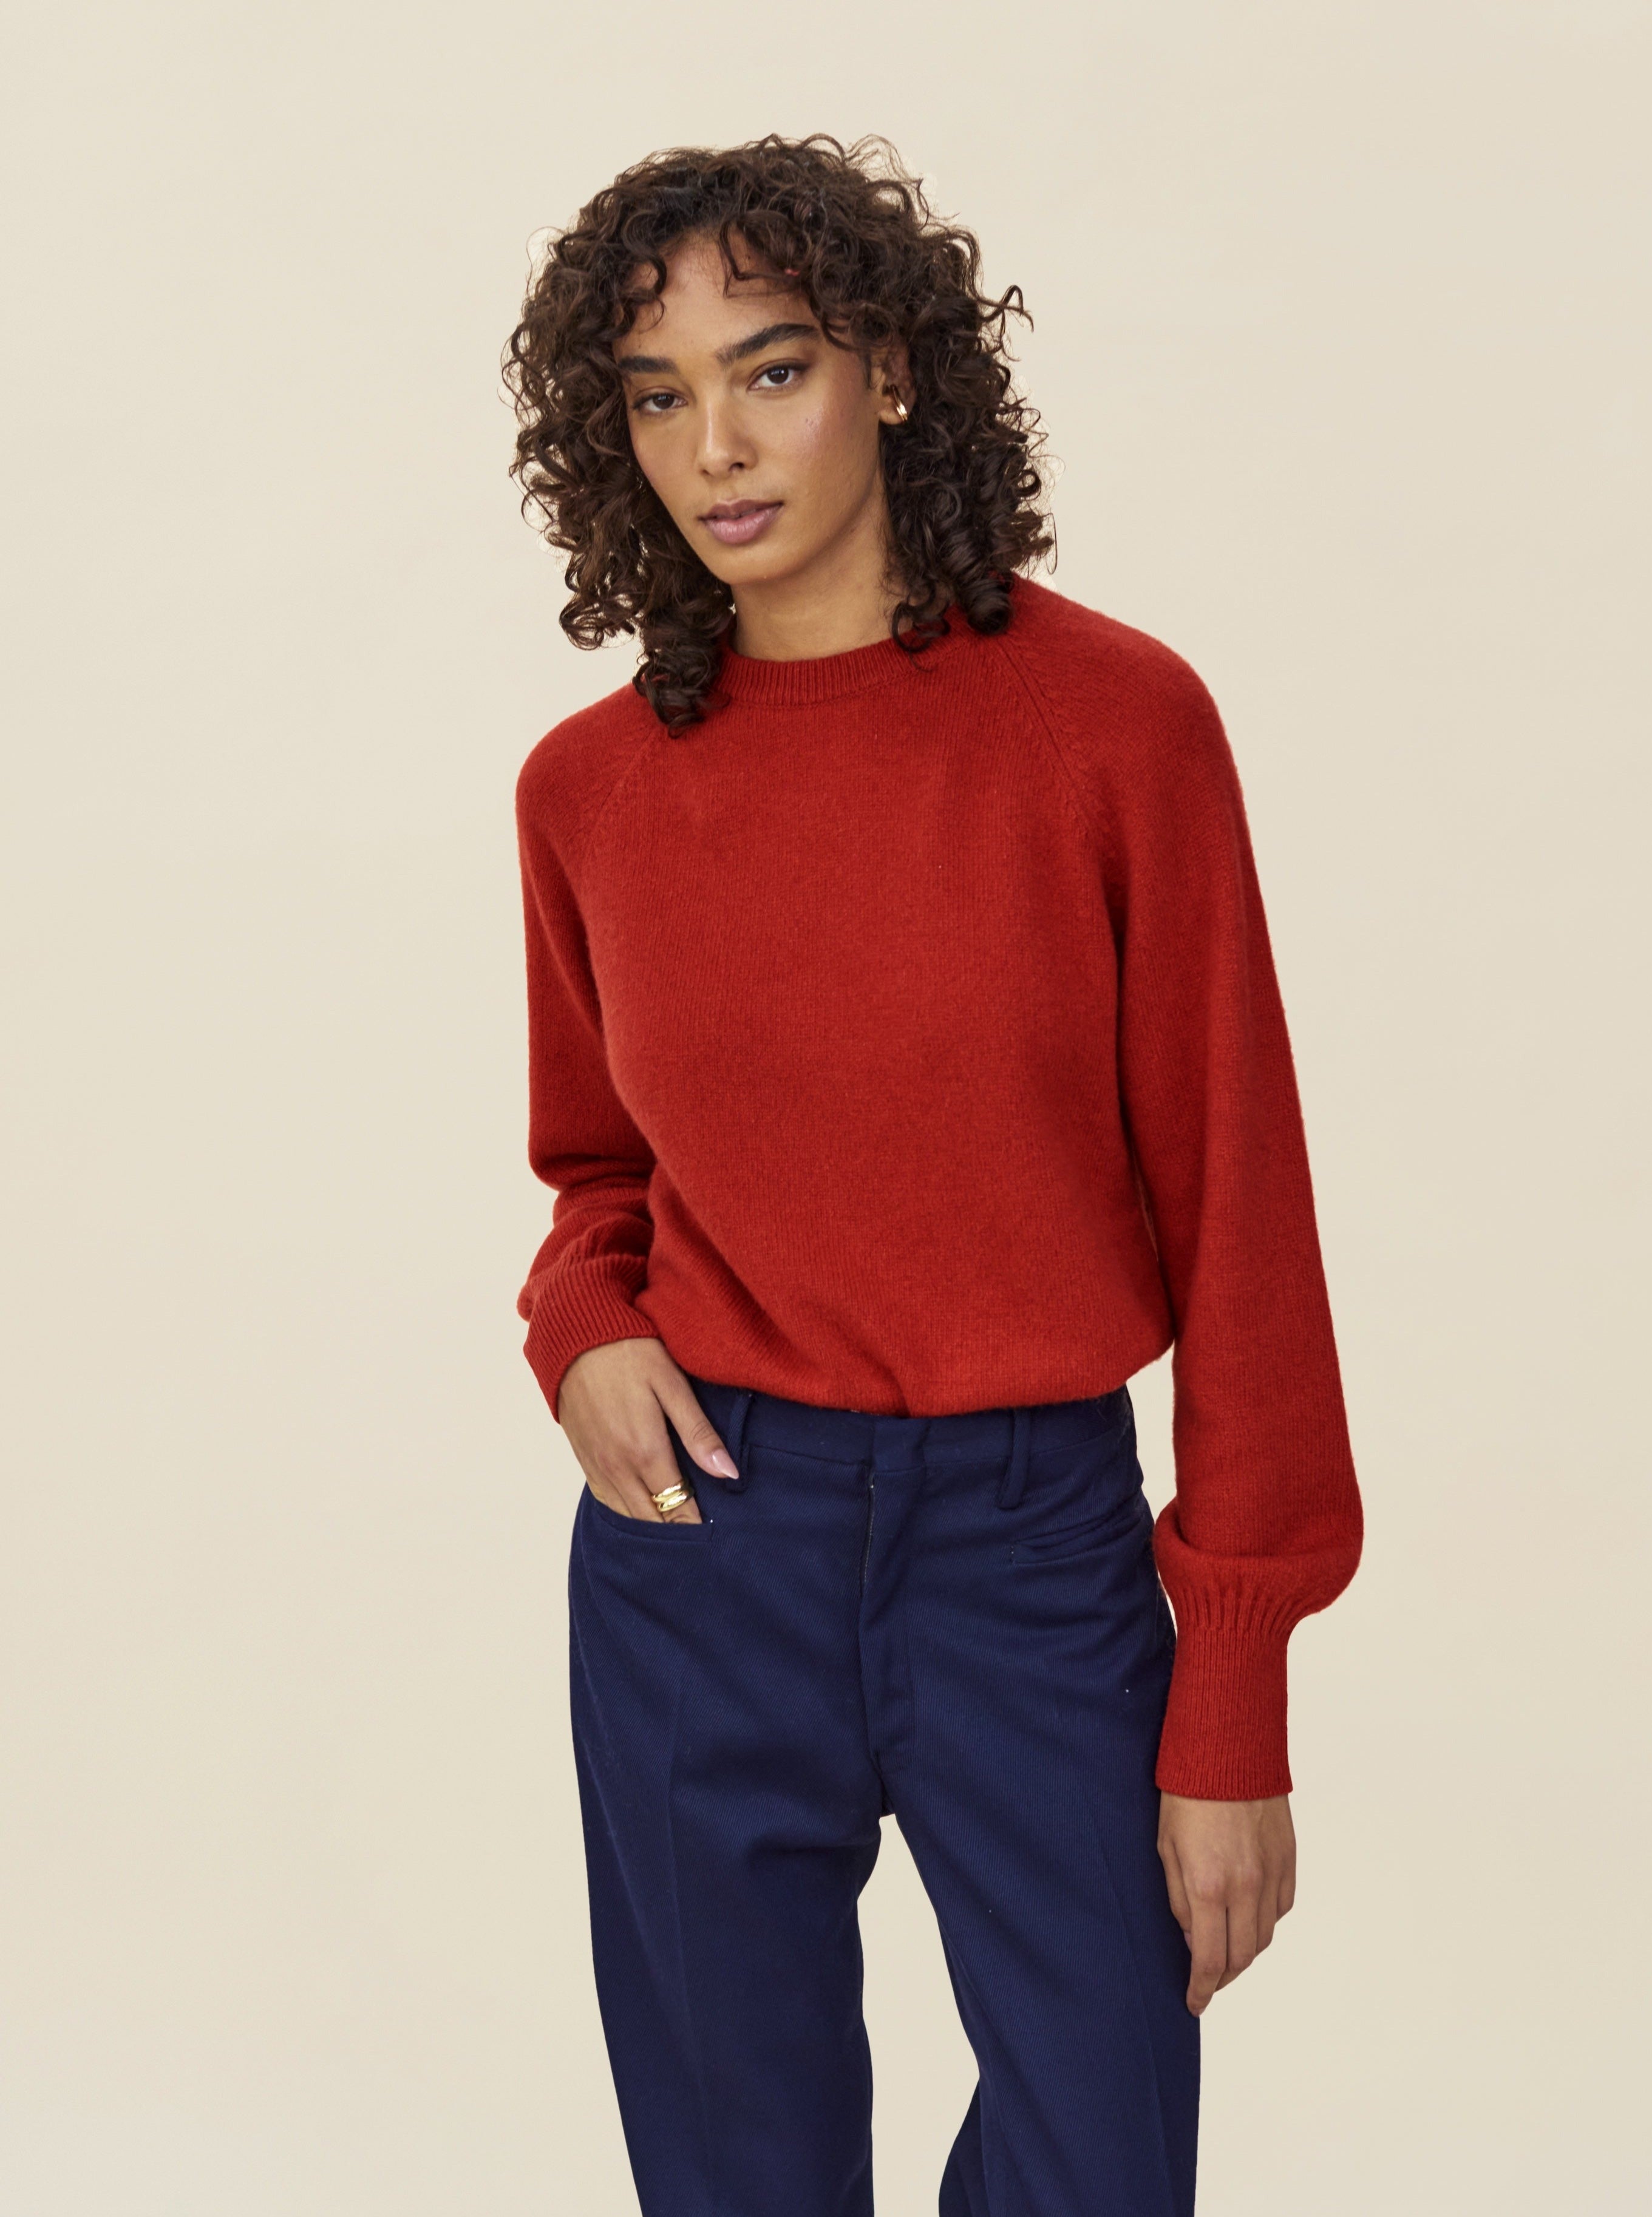 Sweater Crewneck in Red Cashmere Women